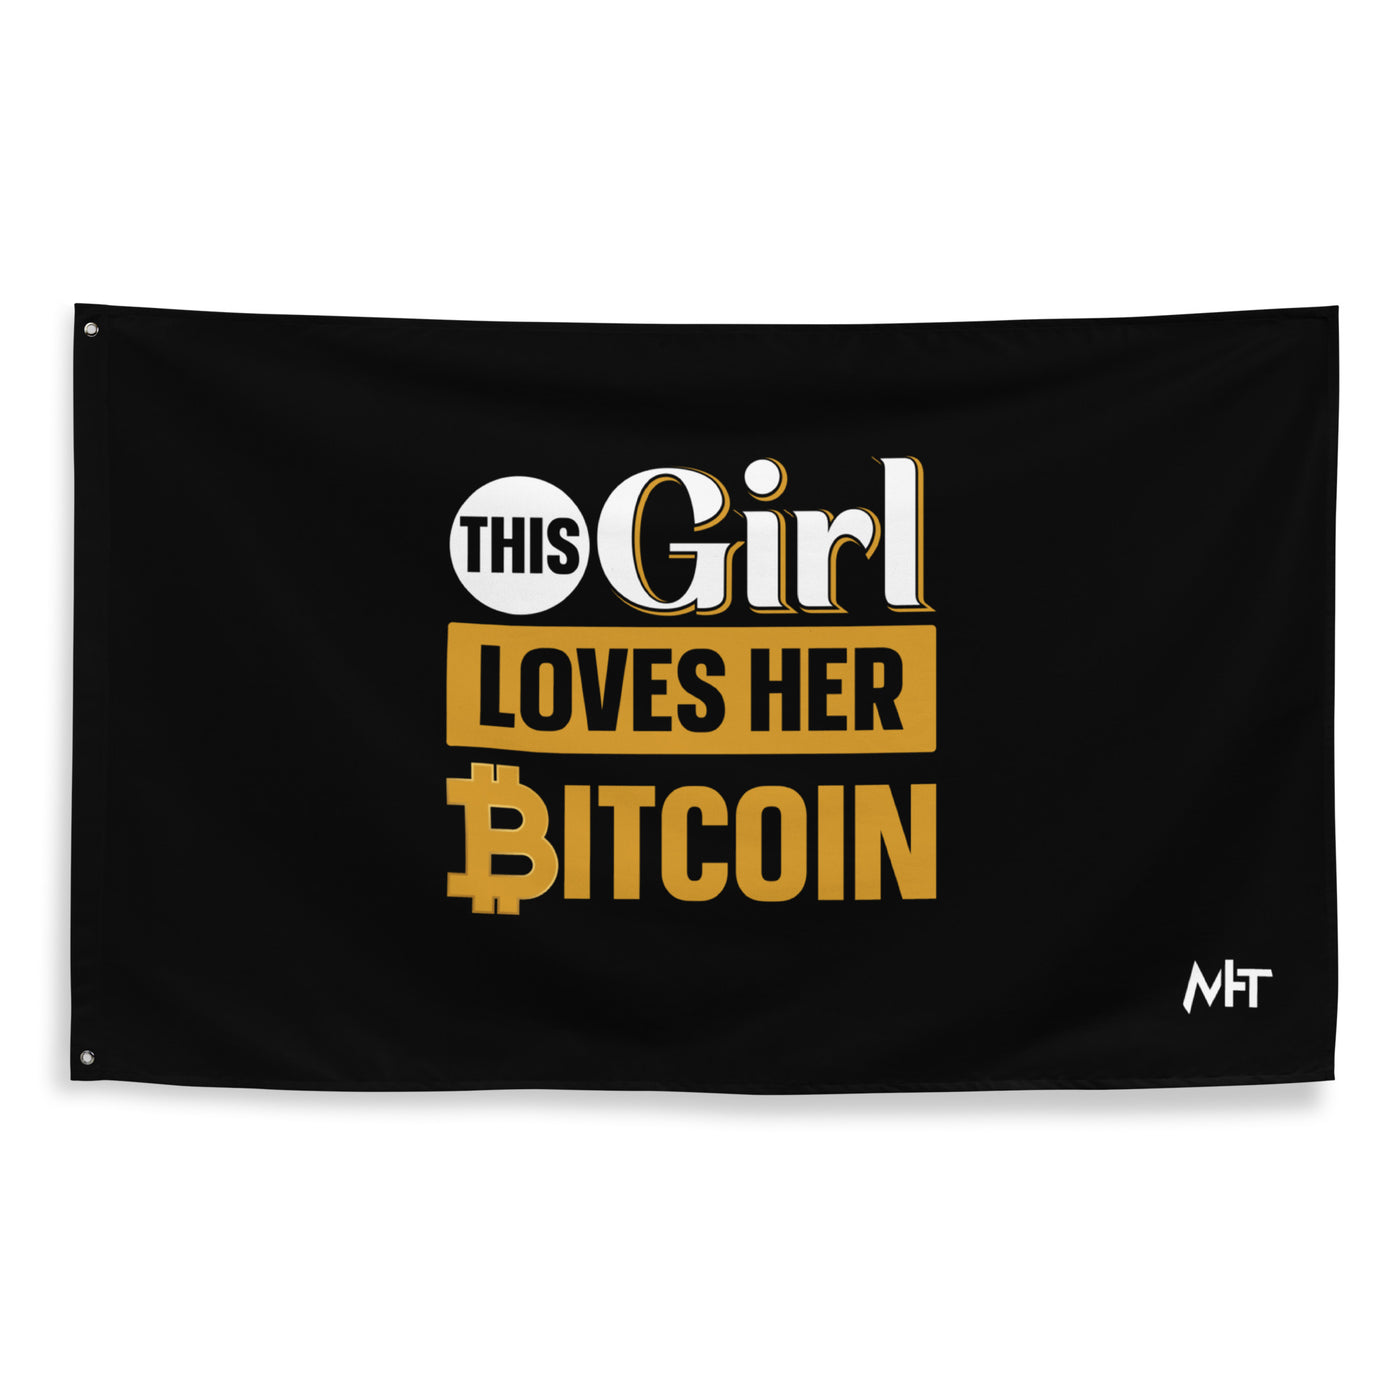 This Girl love her Bitcoin Flag